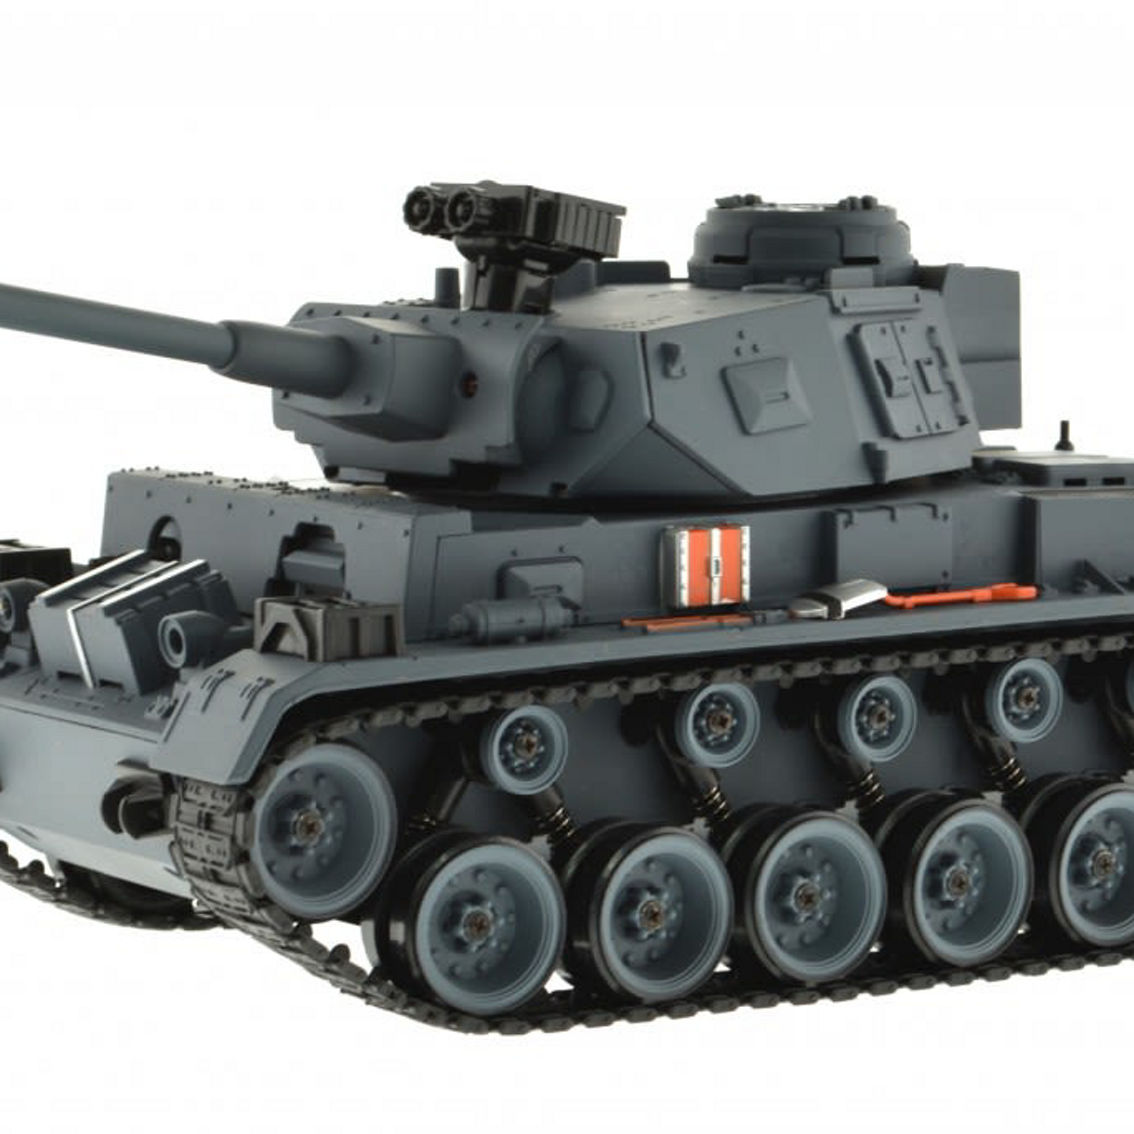 CIS-YZ-827 1:18 scale WWII German Panther III tank with lights sound and BB gun - Image 1 of 5